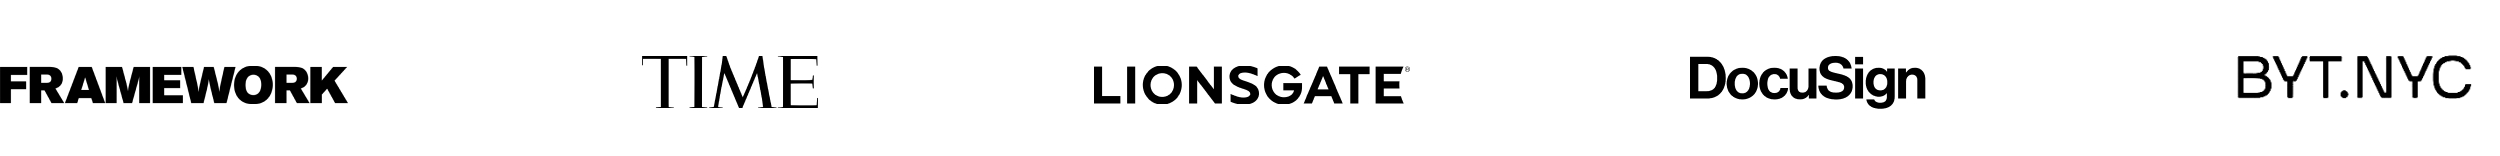 Company logos of Framework, TIME, Lionsgate, DocuSign, and BYT.NYC